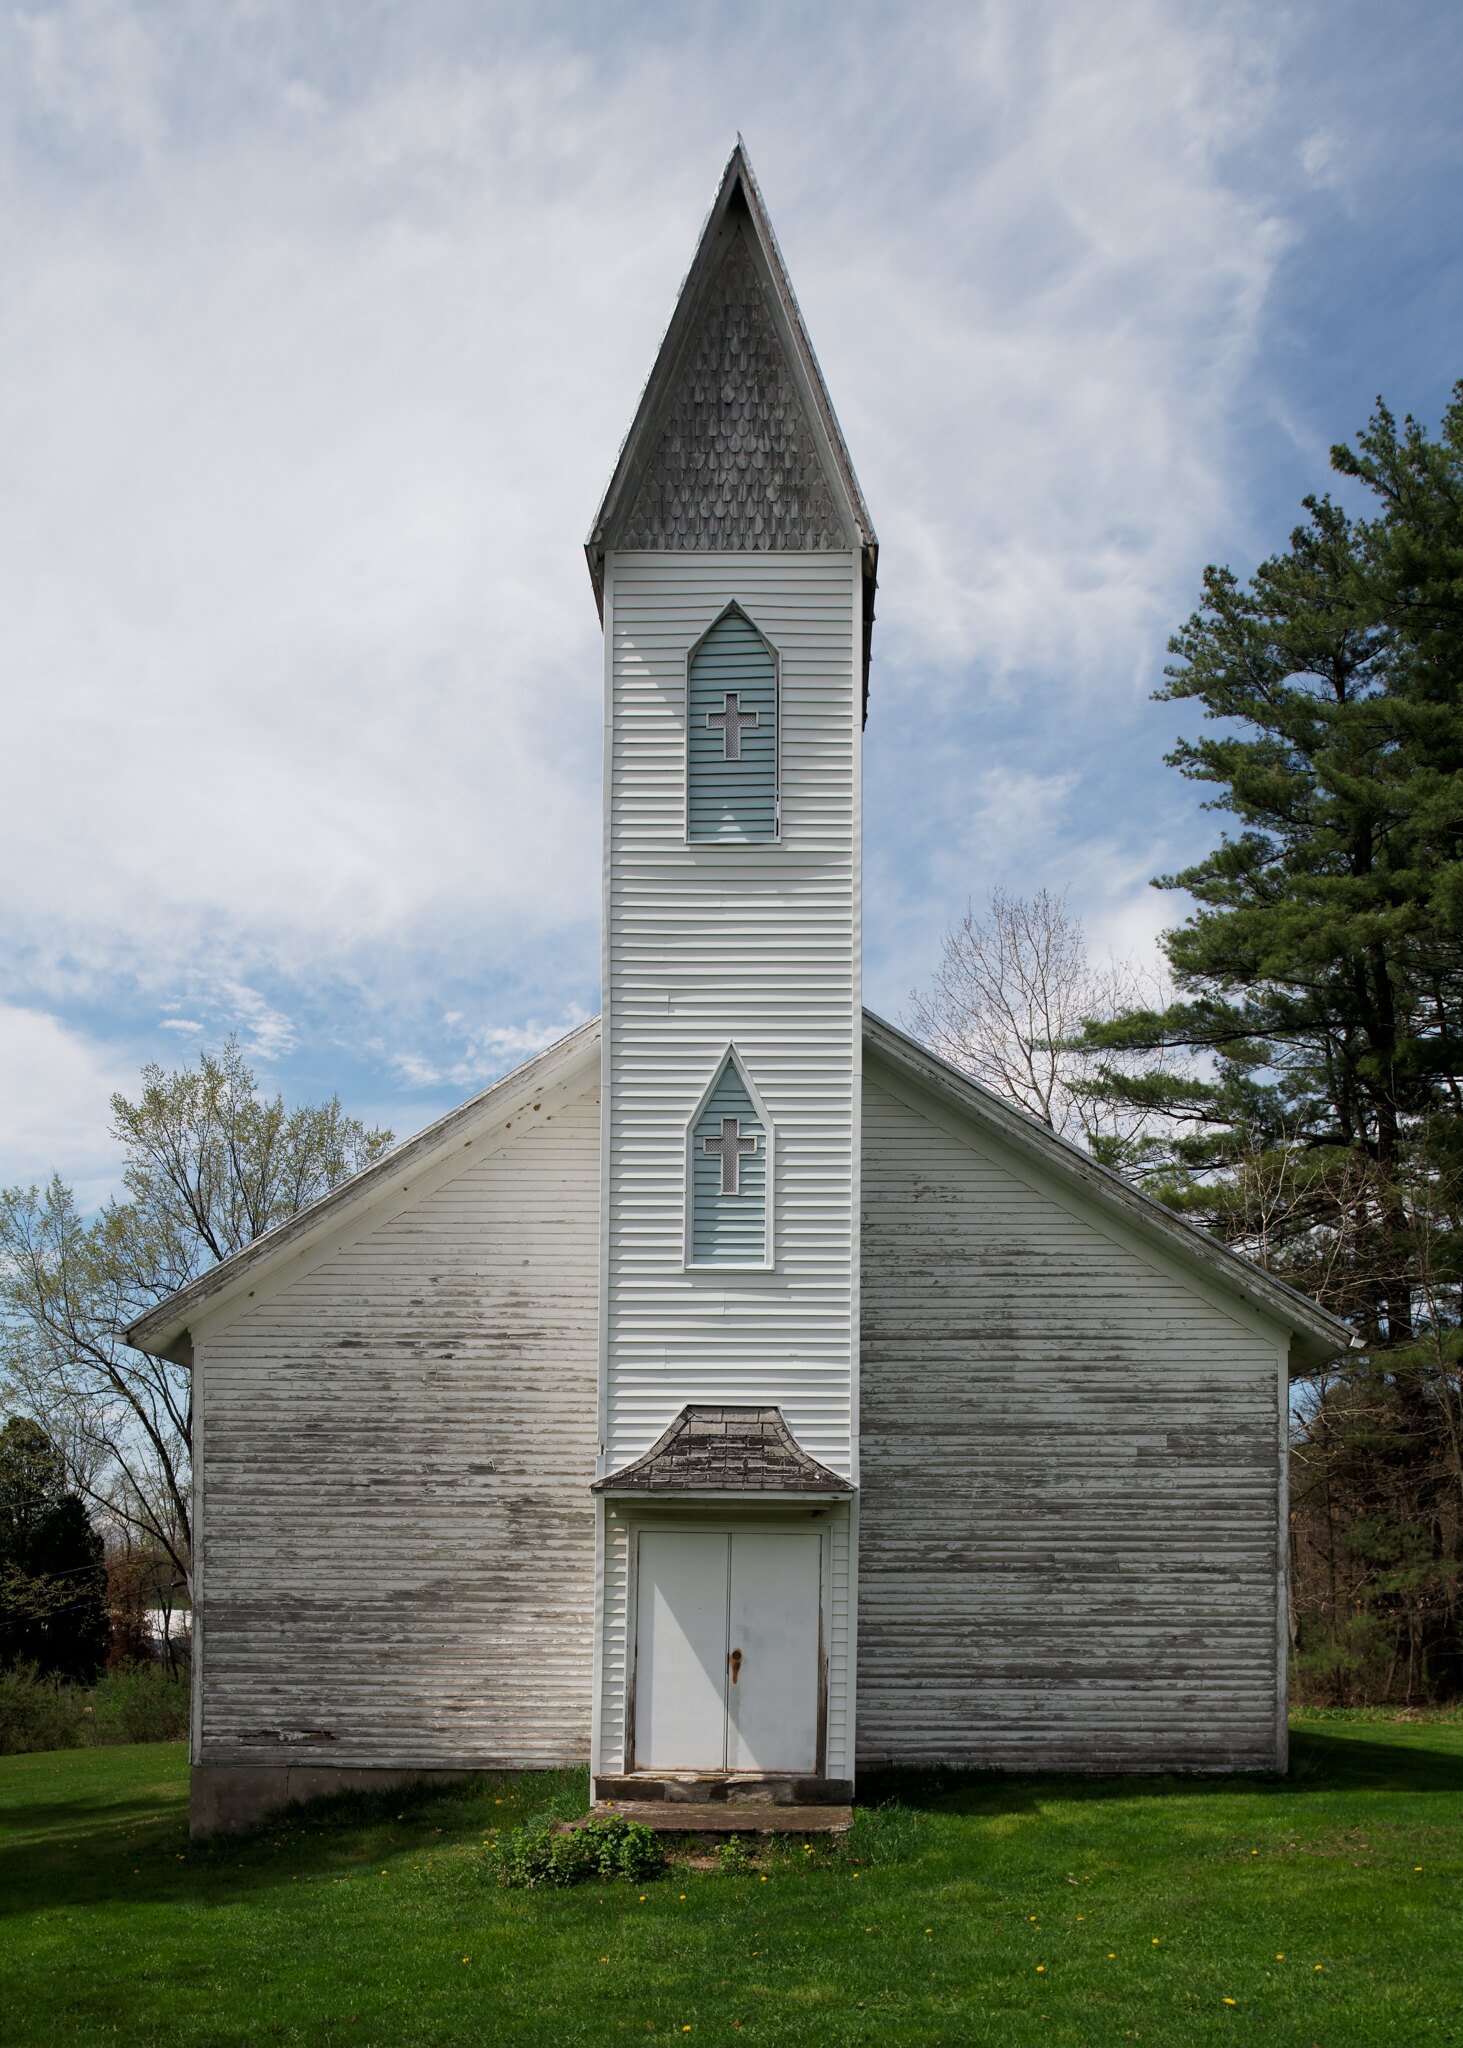  Old Germany Church, Lycoming County, PA.  Built in 1835 